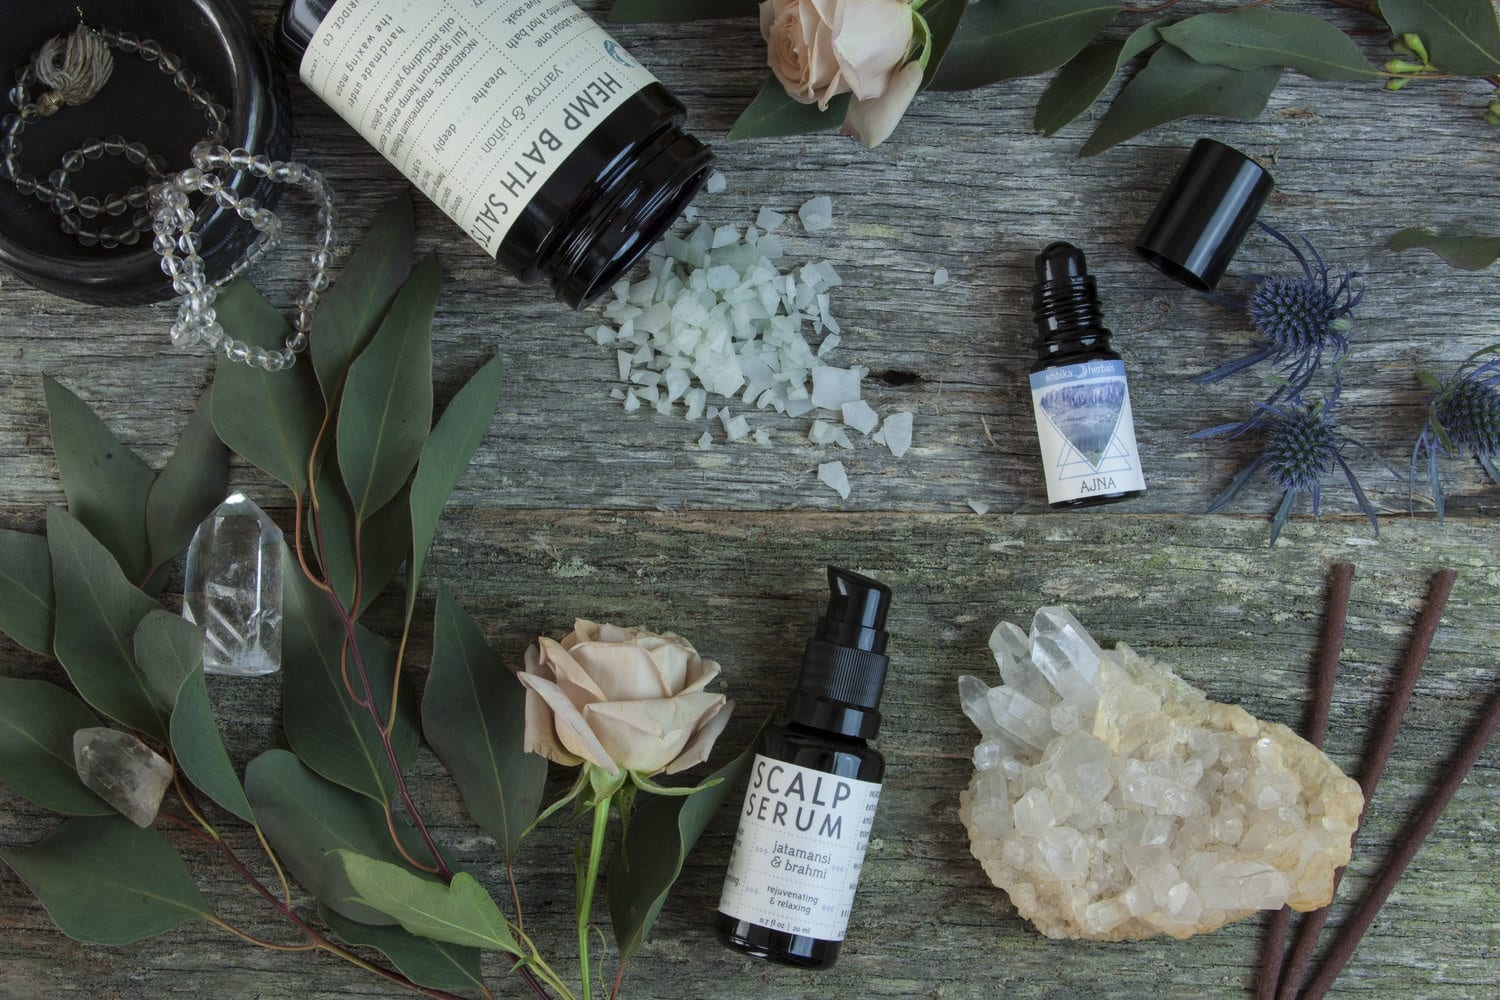 Serums and crystals from Ambika